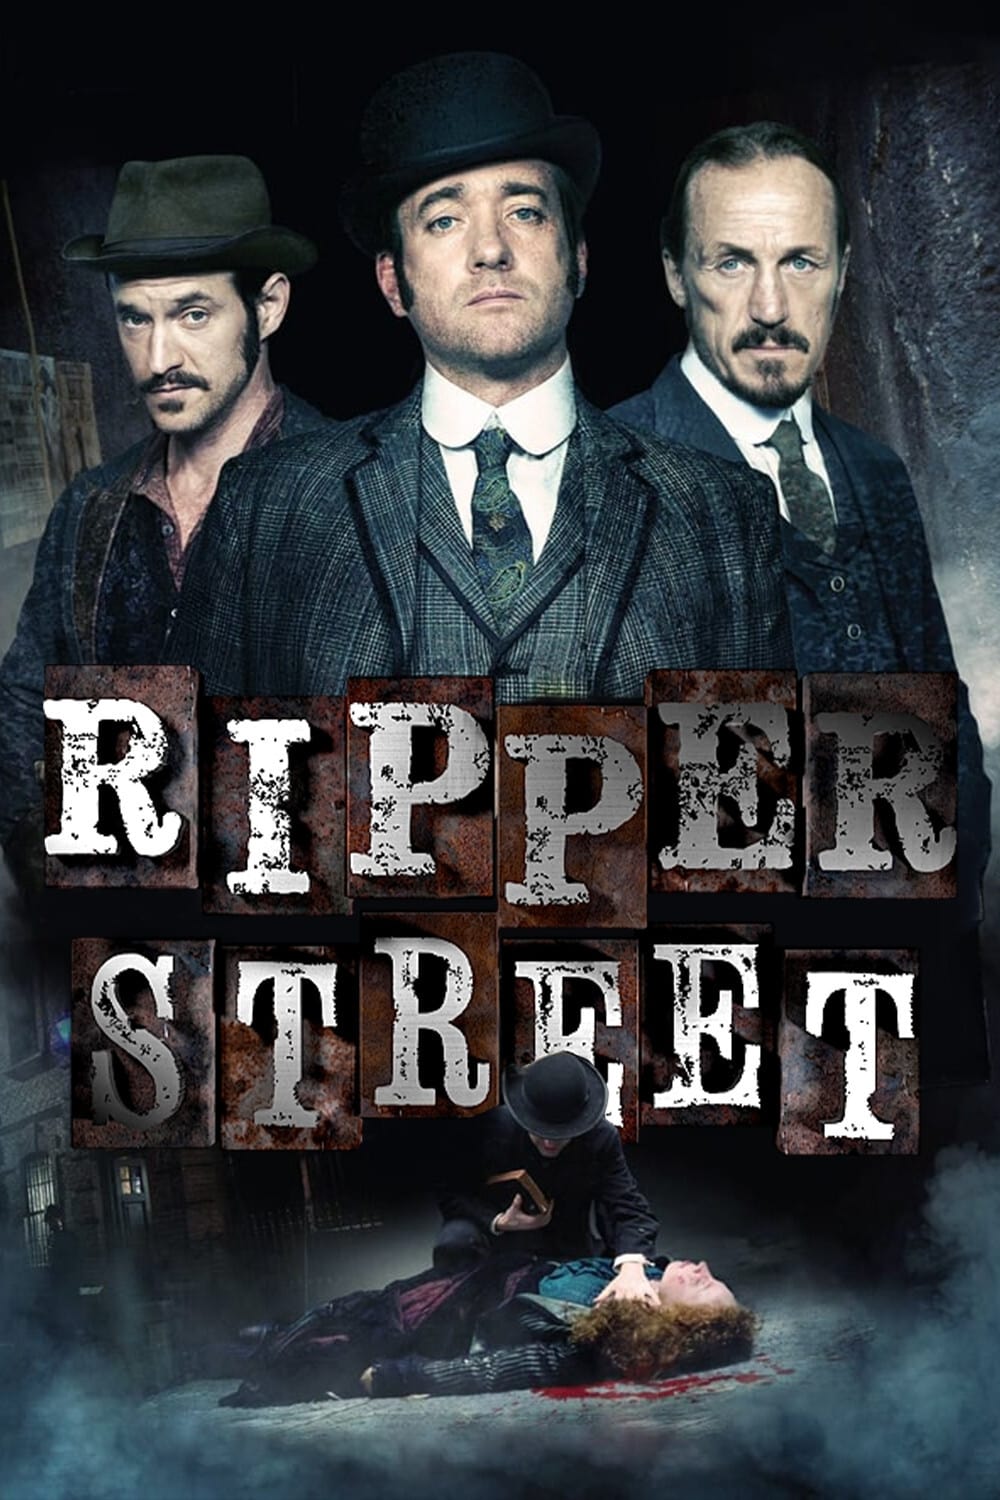 Ripper Street TV Shows About Jack The Ripper